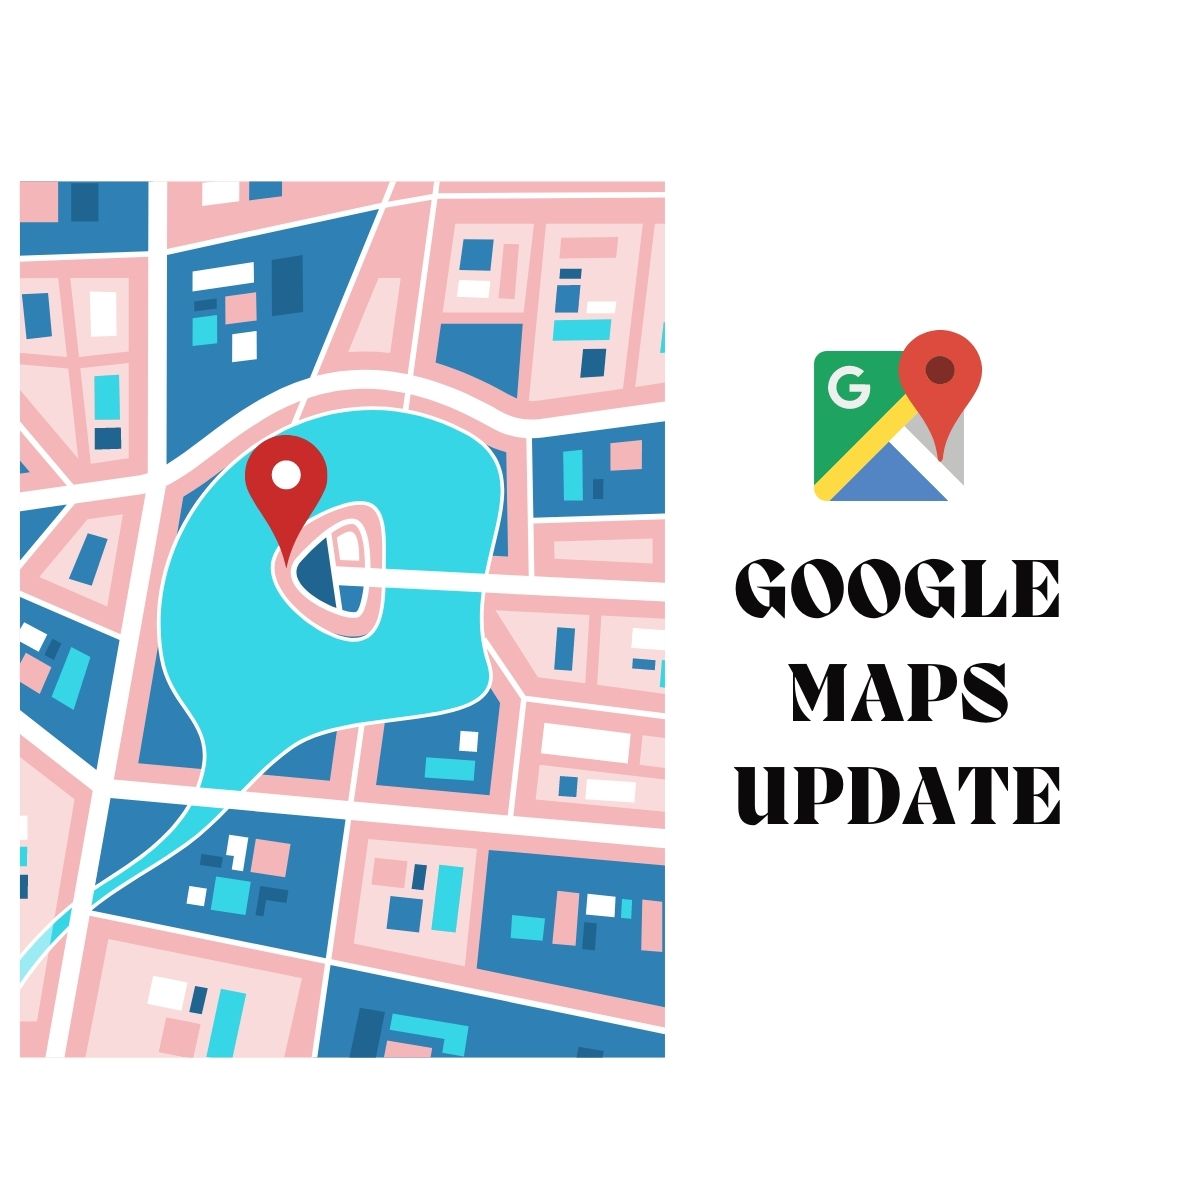 Google Maps Update: Expanded Navigation, Improved Real-Time Traffic Updates, and More